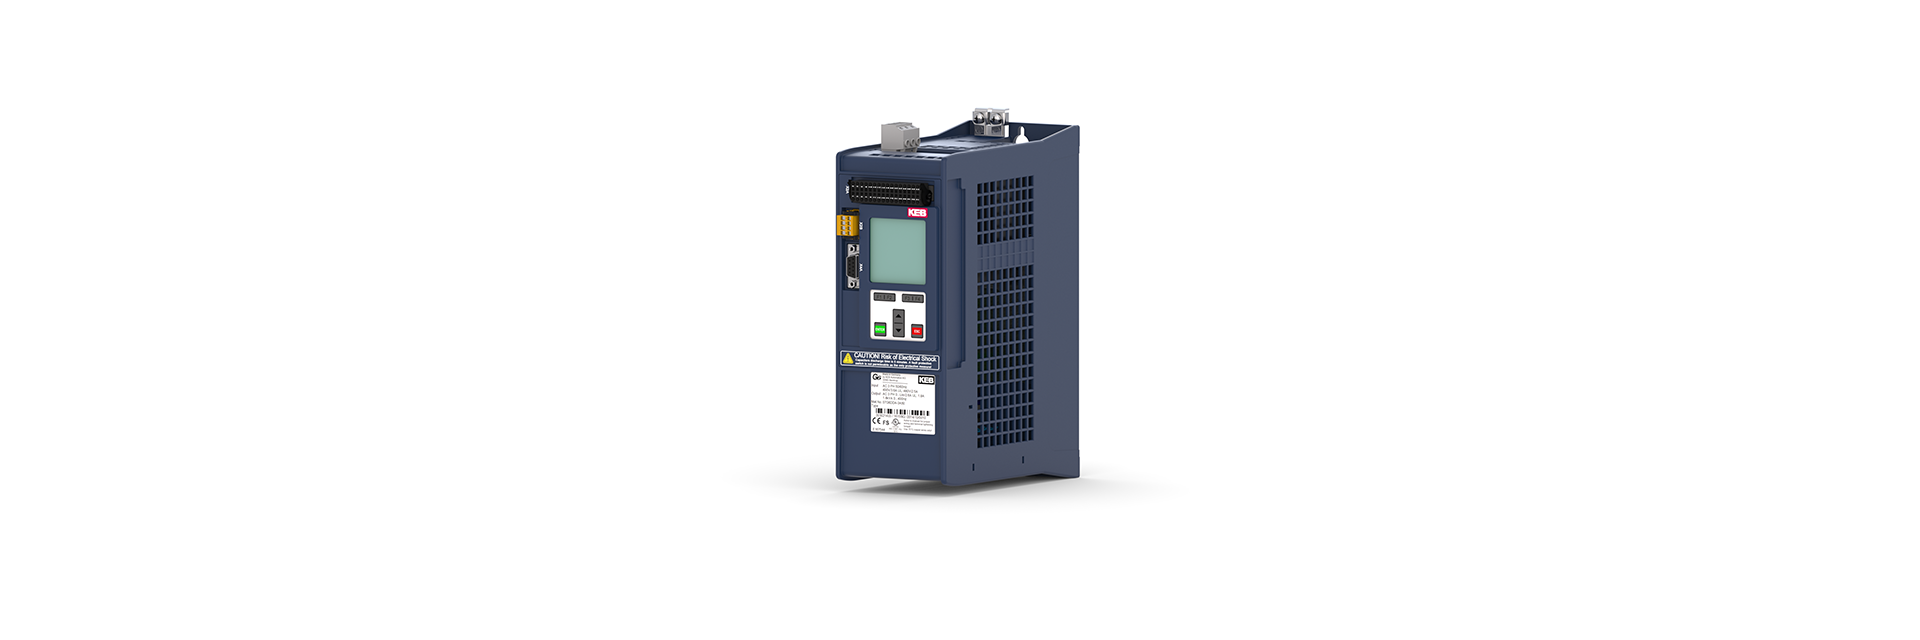 Frequency Inverter COMBIVERT G6 in housing size B